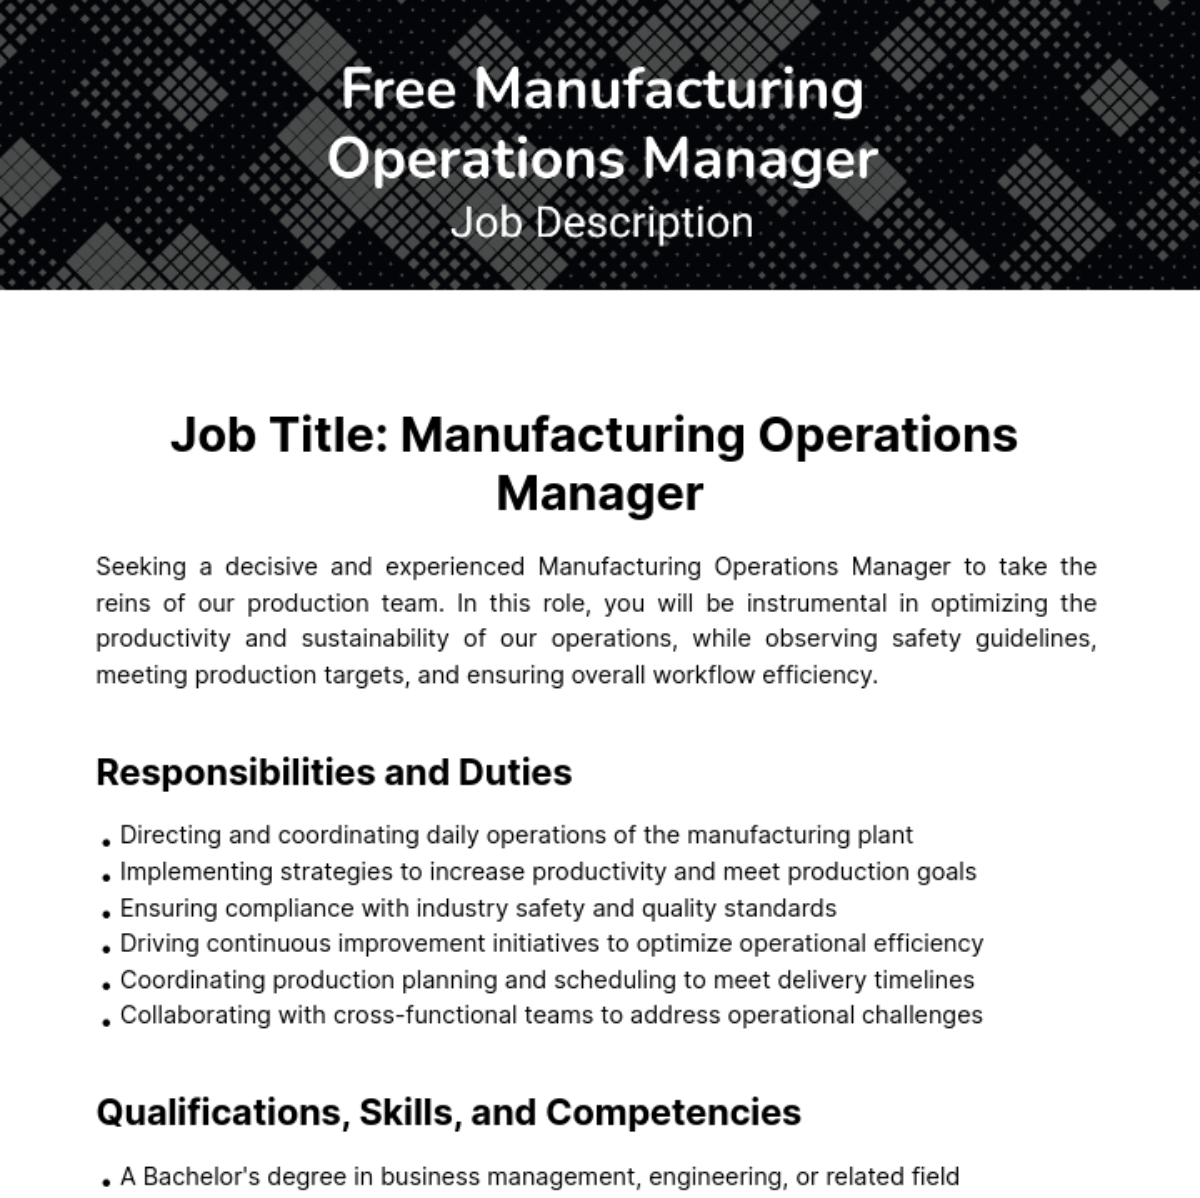 Free Manufacturing Operations Manager Job Description Template